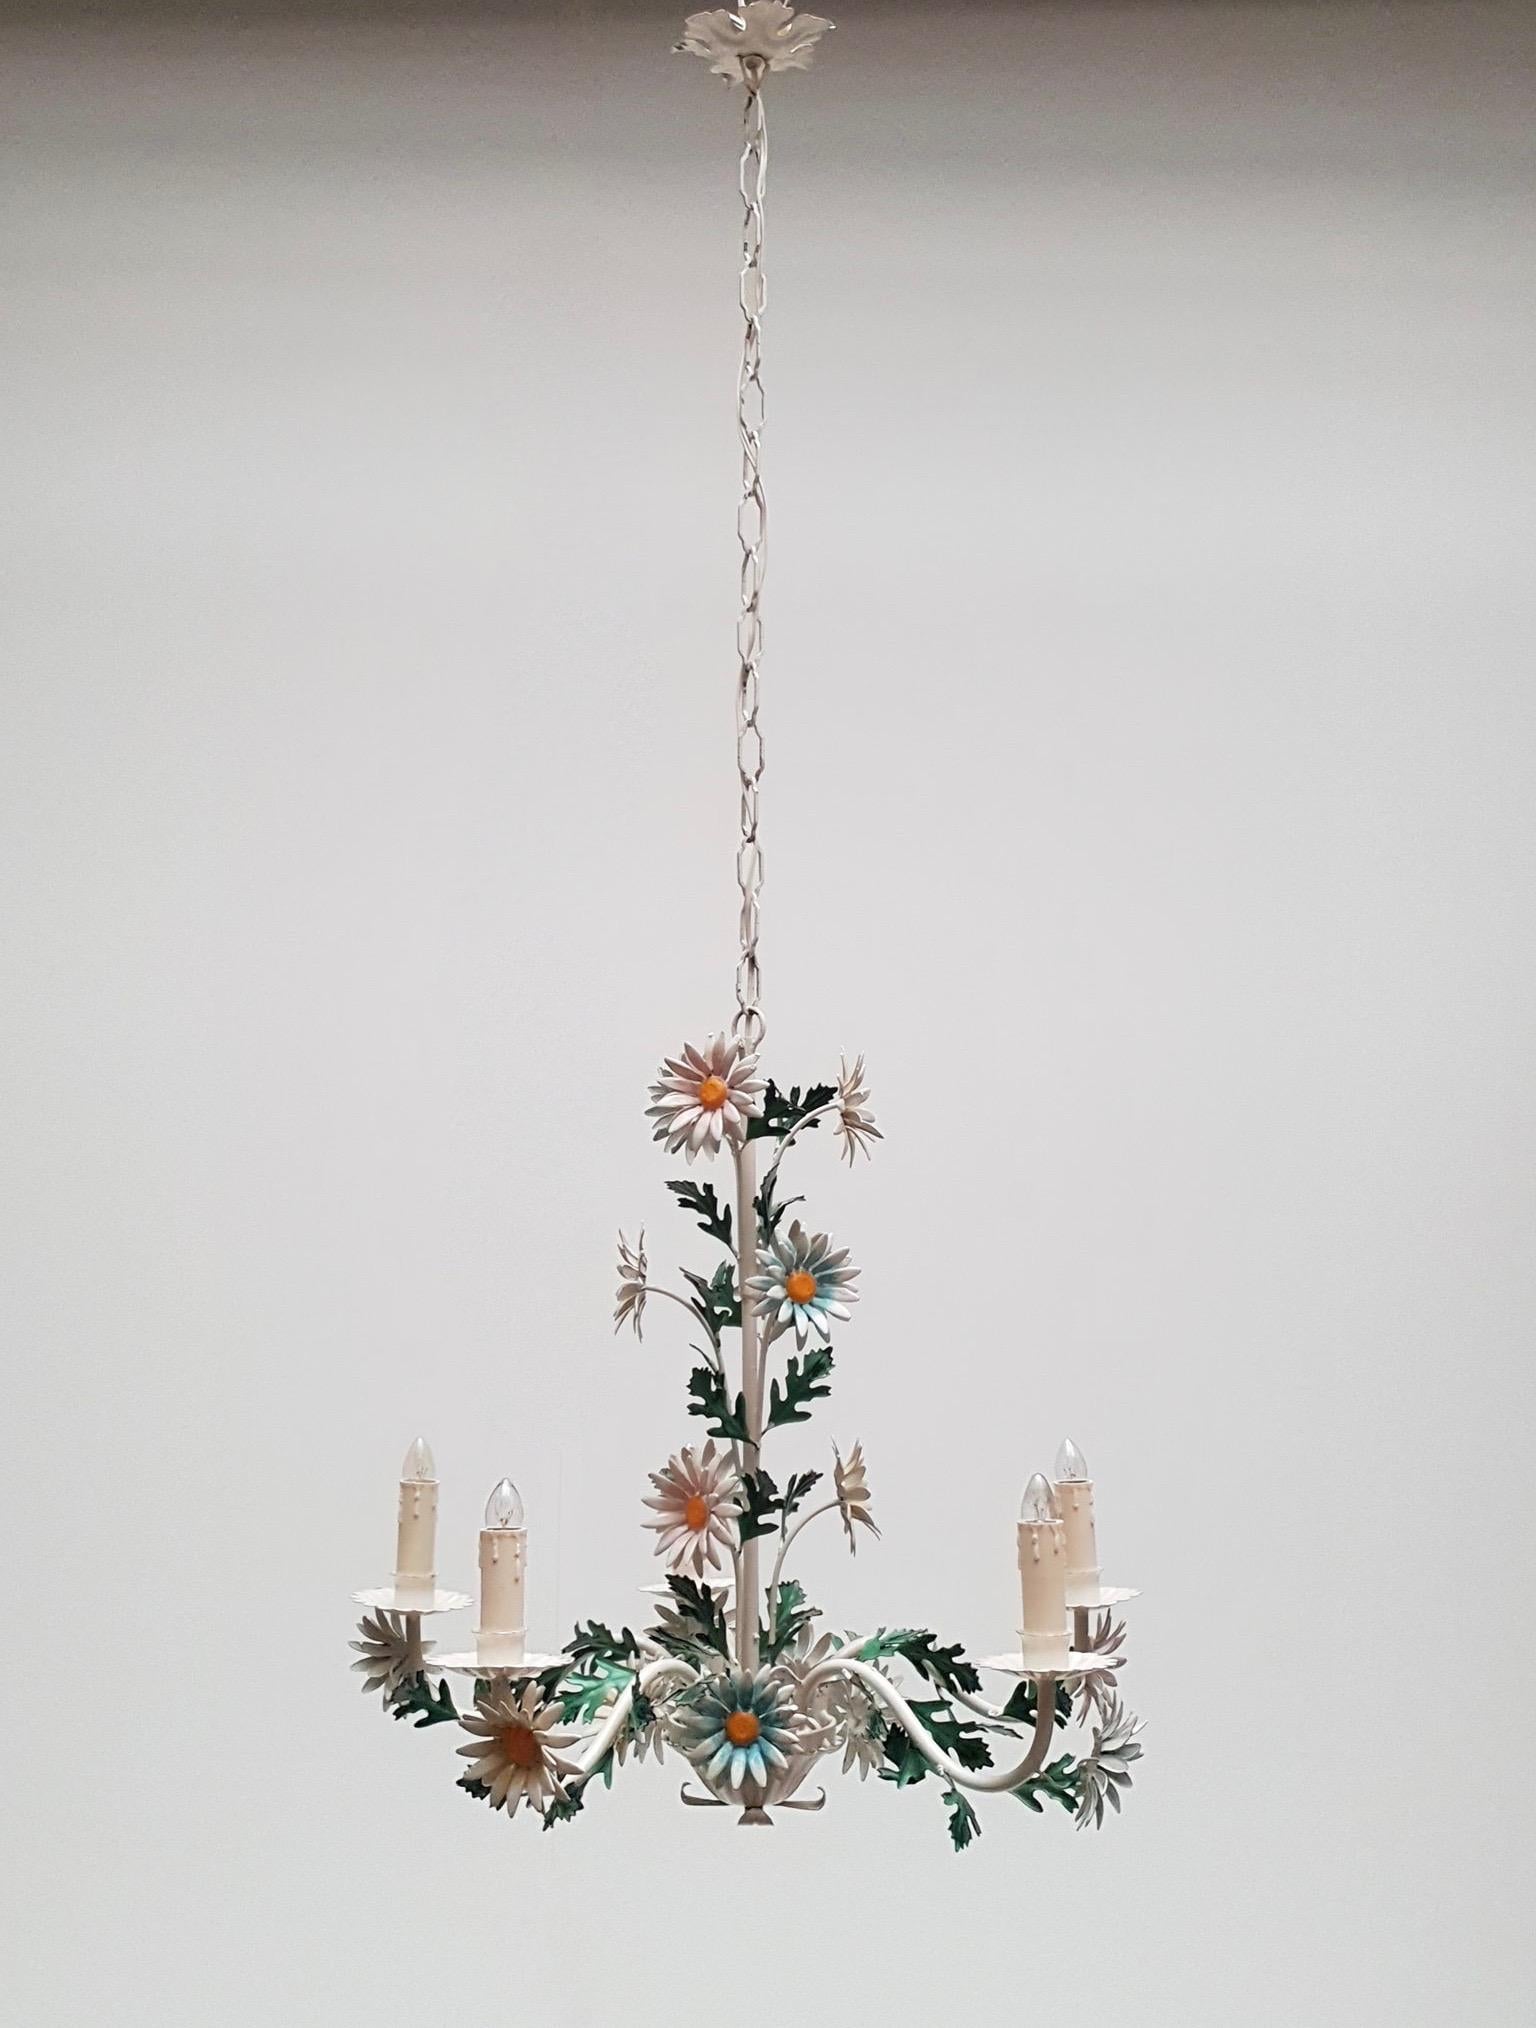 Mid-20th Century Italian Painted Iron and Tole Chandelier with Flowers (Italienisch)